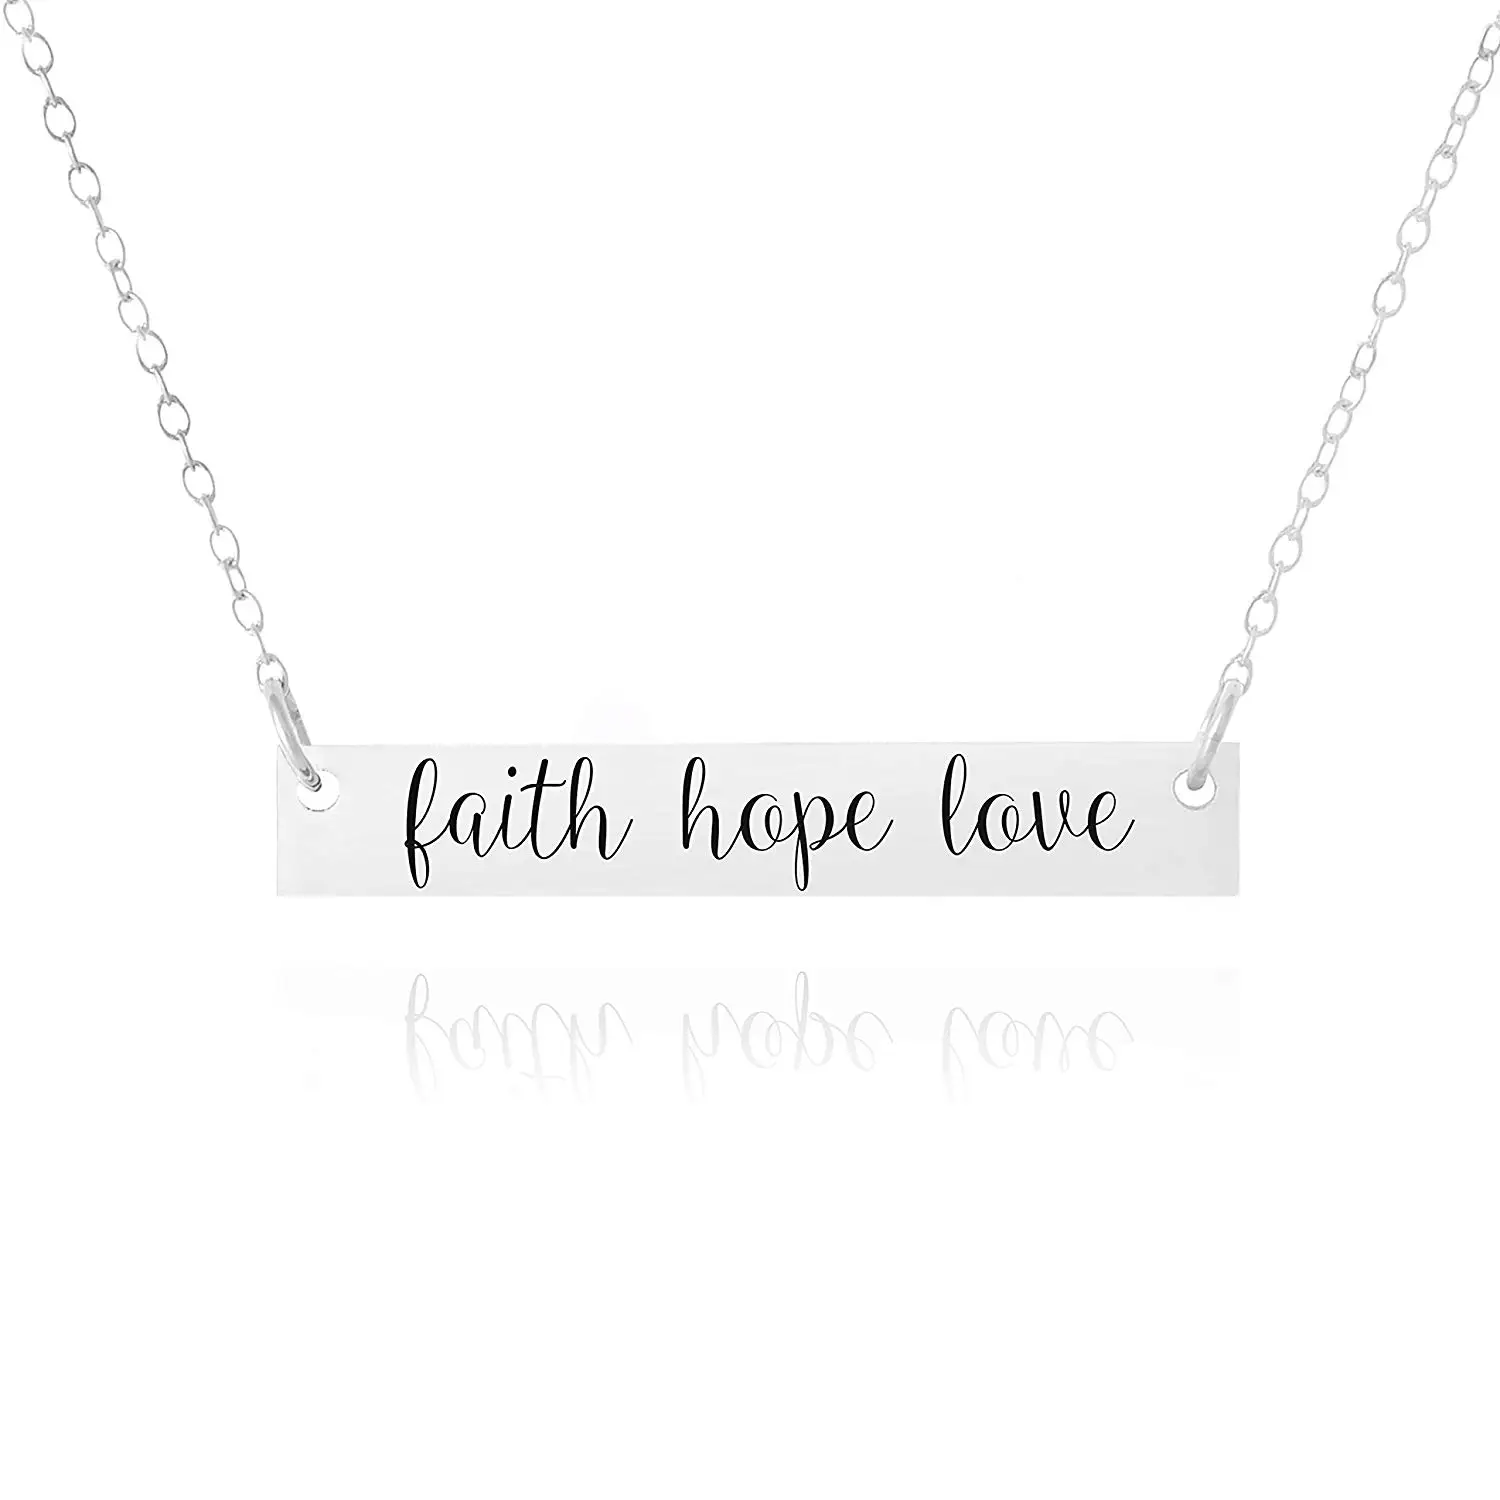 5//8 long JewelryWeb Sterling Silver Faith Hope and Charity Charm